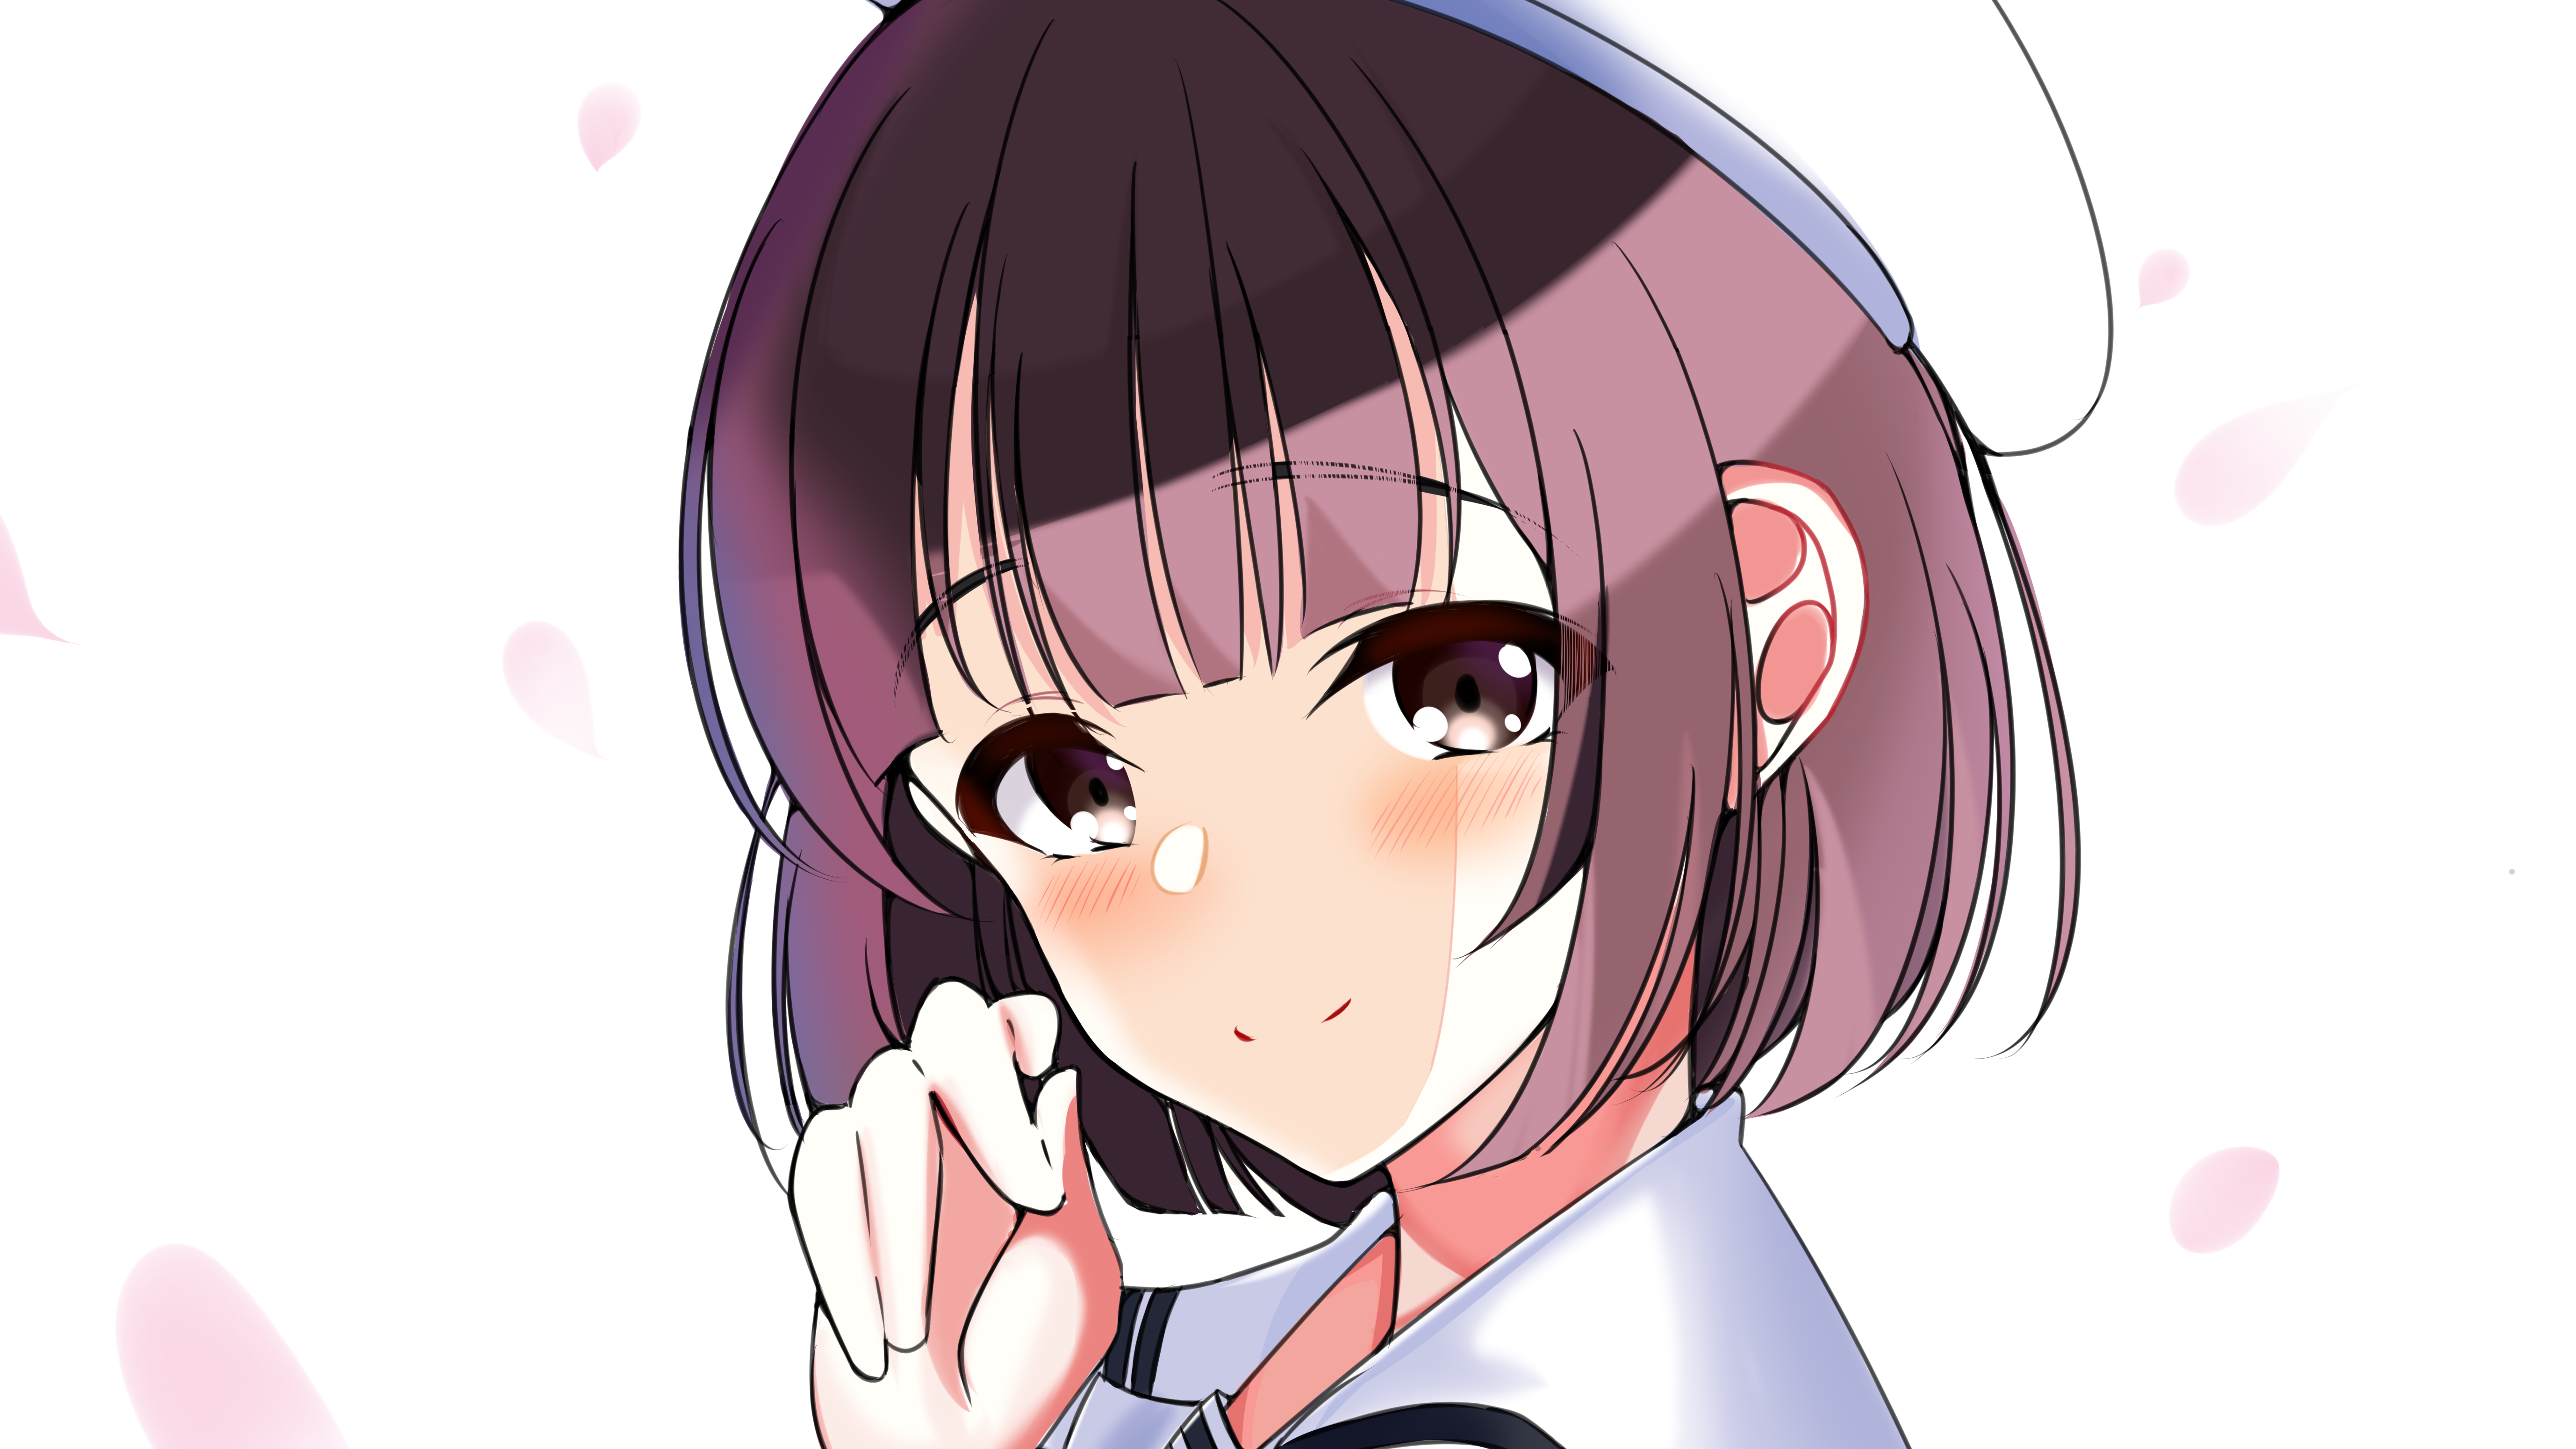 Saekano -How to Raise a Boring Girlfriend- One-on-one Route After 8 Years -  Watch on Crunchyroll